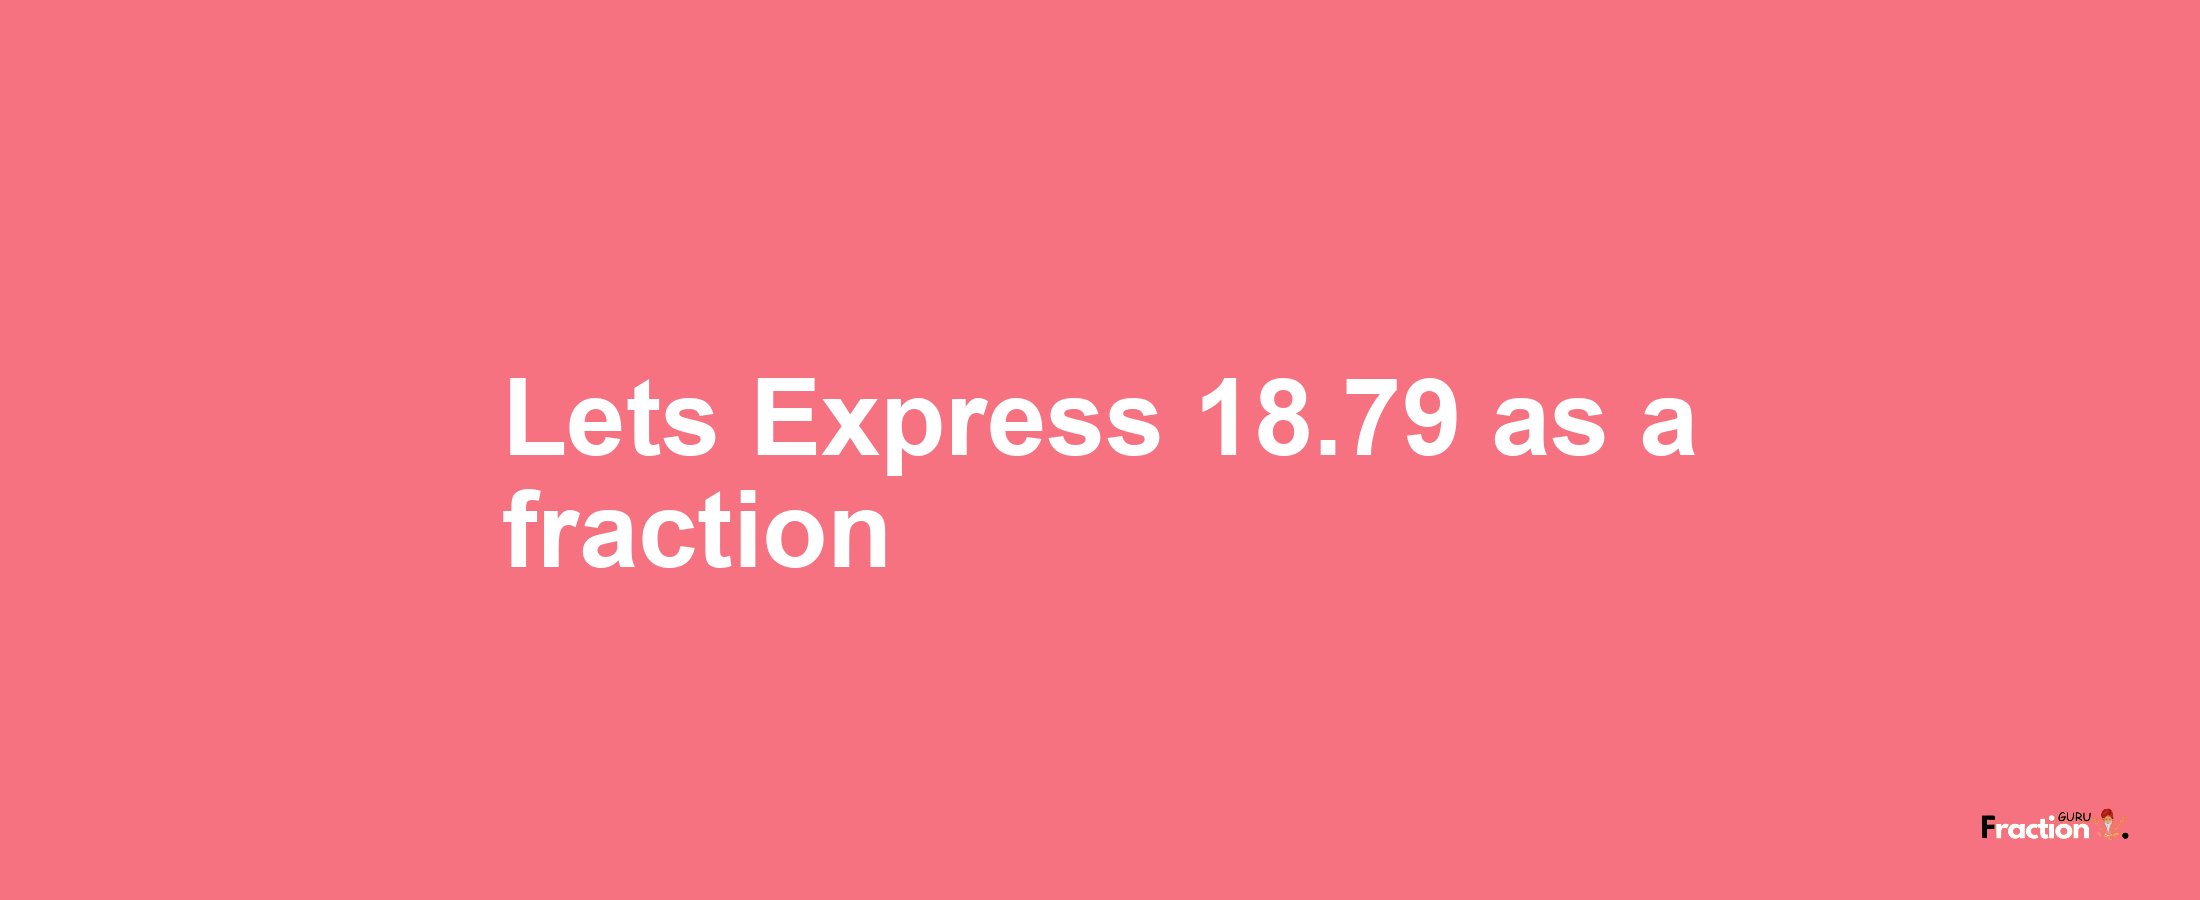 Lets Express 18.79 as afraction